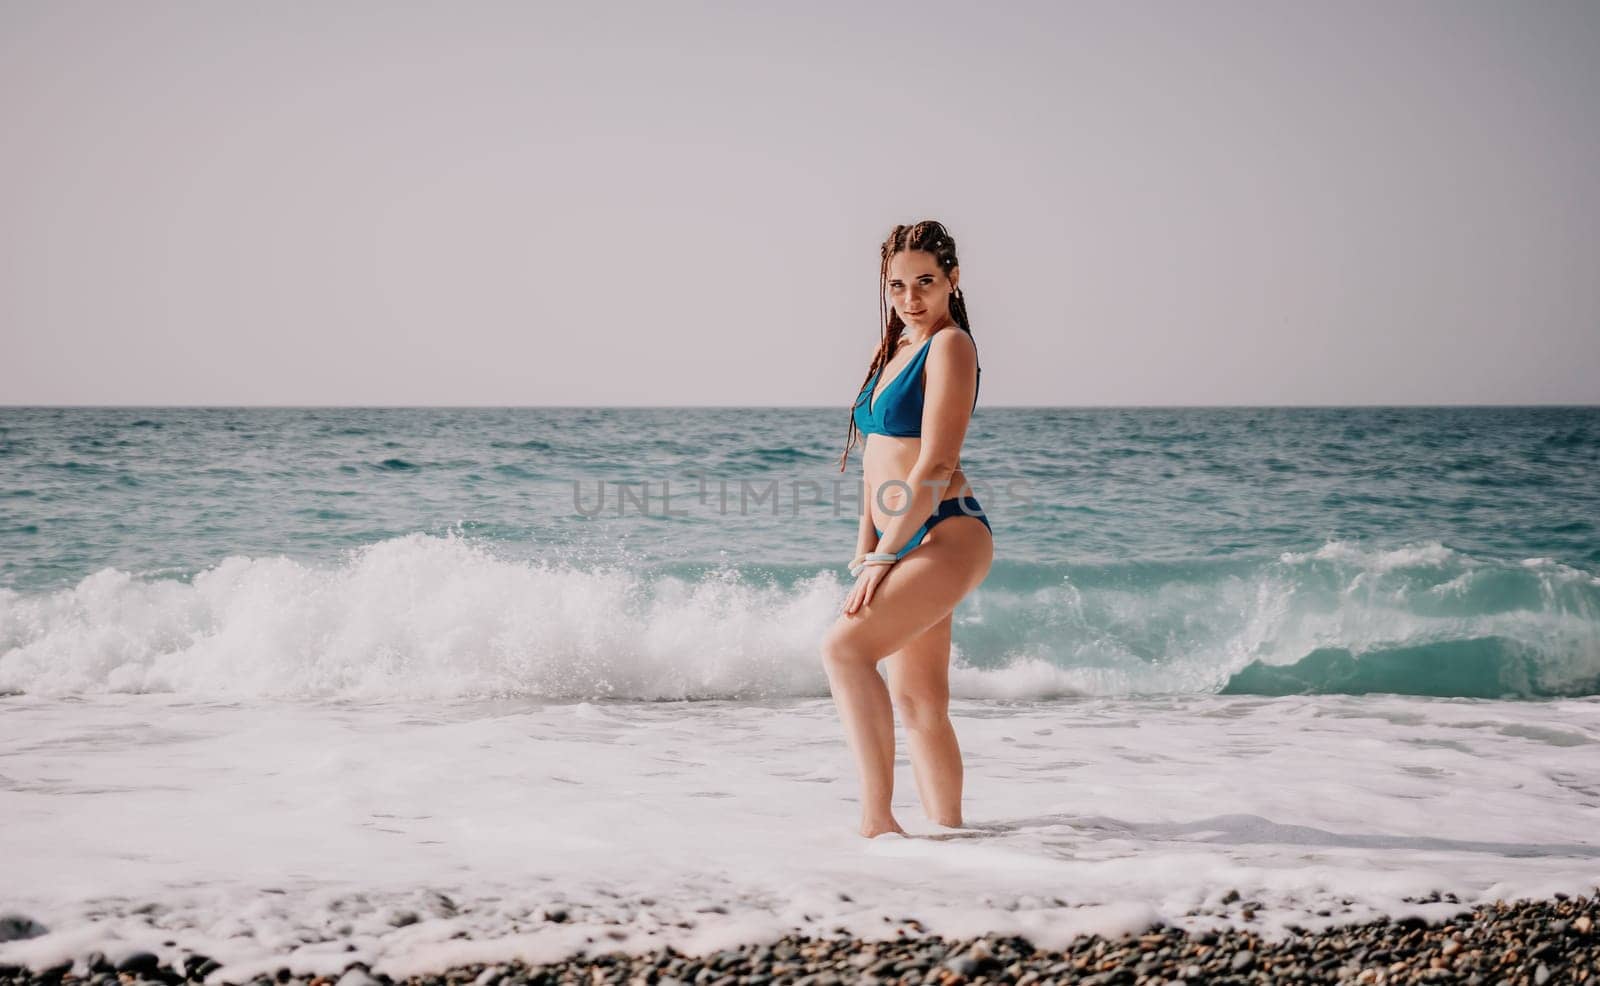 A tourist woman in blue bikini on beach enjoys the turquoise sea during her summer holiday. Rear view. Beach vacation. woman with braids dreadlocks standing with her arms raised enjoying beach ocean. by panophotograph